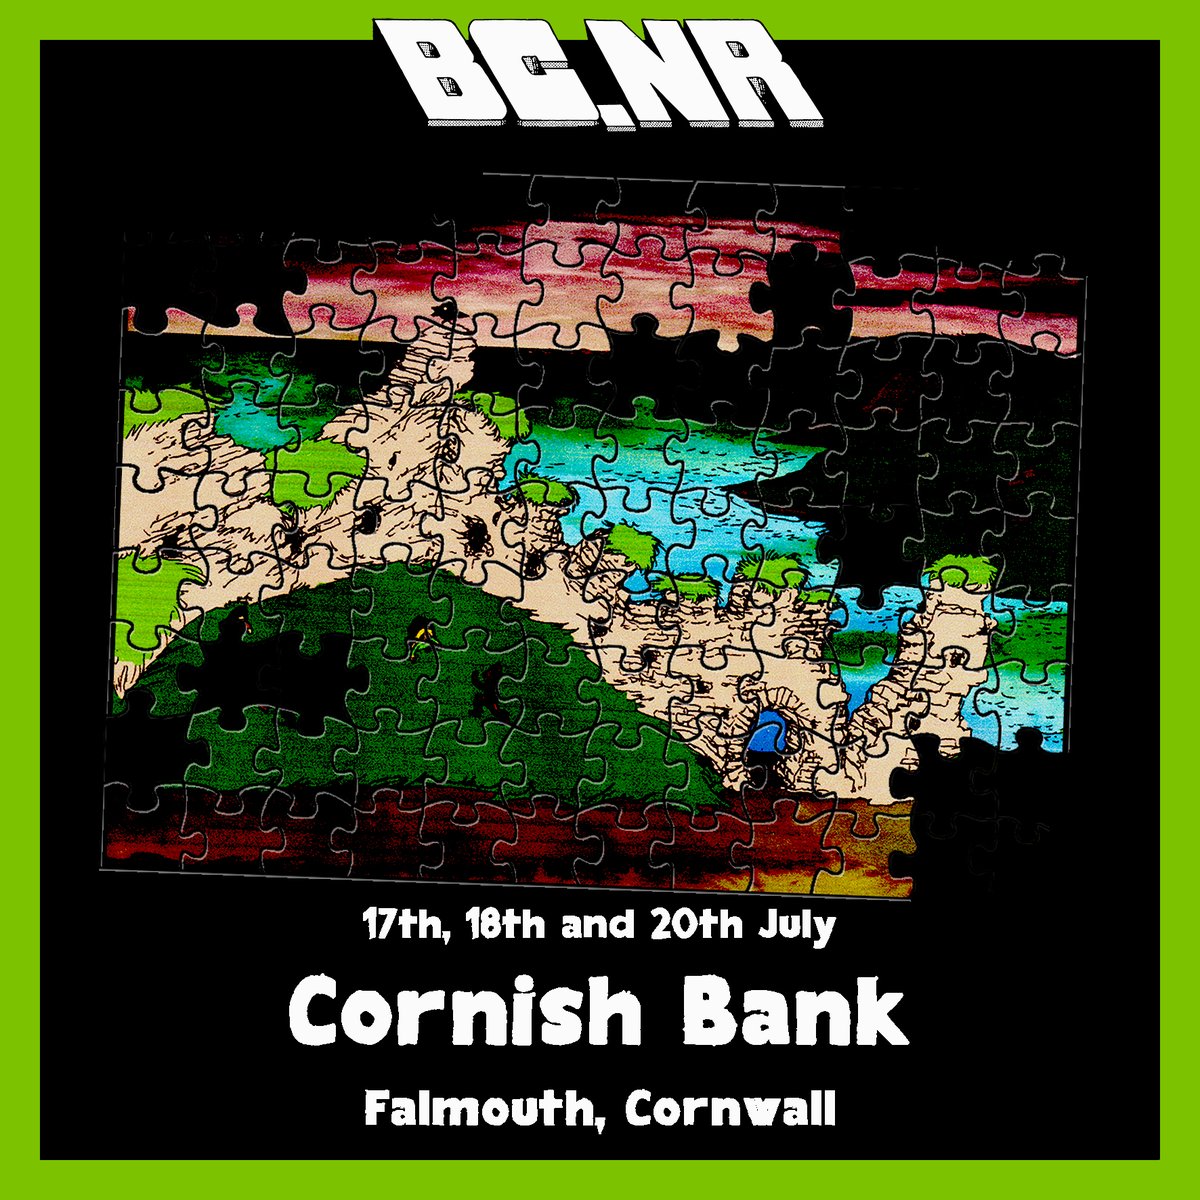 In July we will be playing three shows at The Cornish Bank in Falmouth. 

These will be small shows where we will road test new music that we’ve been working on over the last 12 months............................................................................................